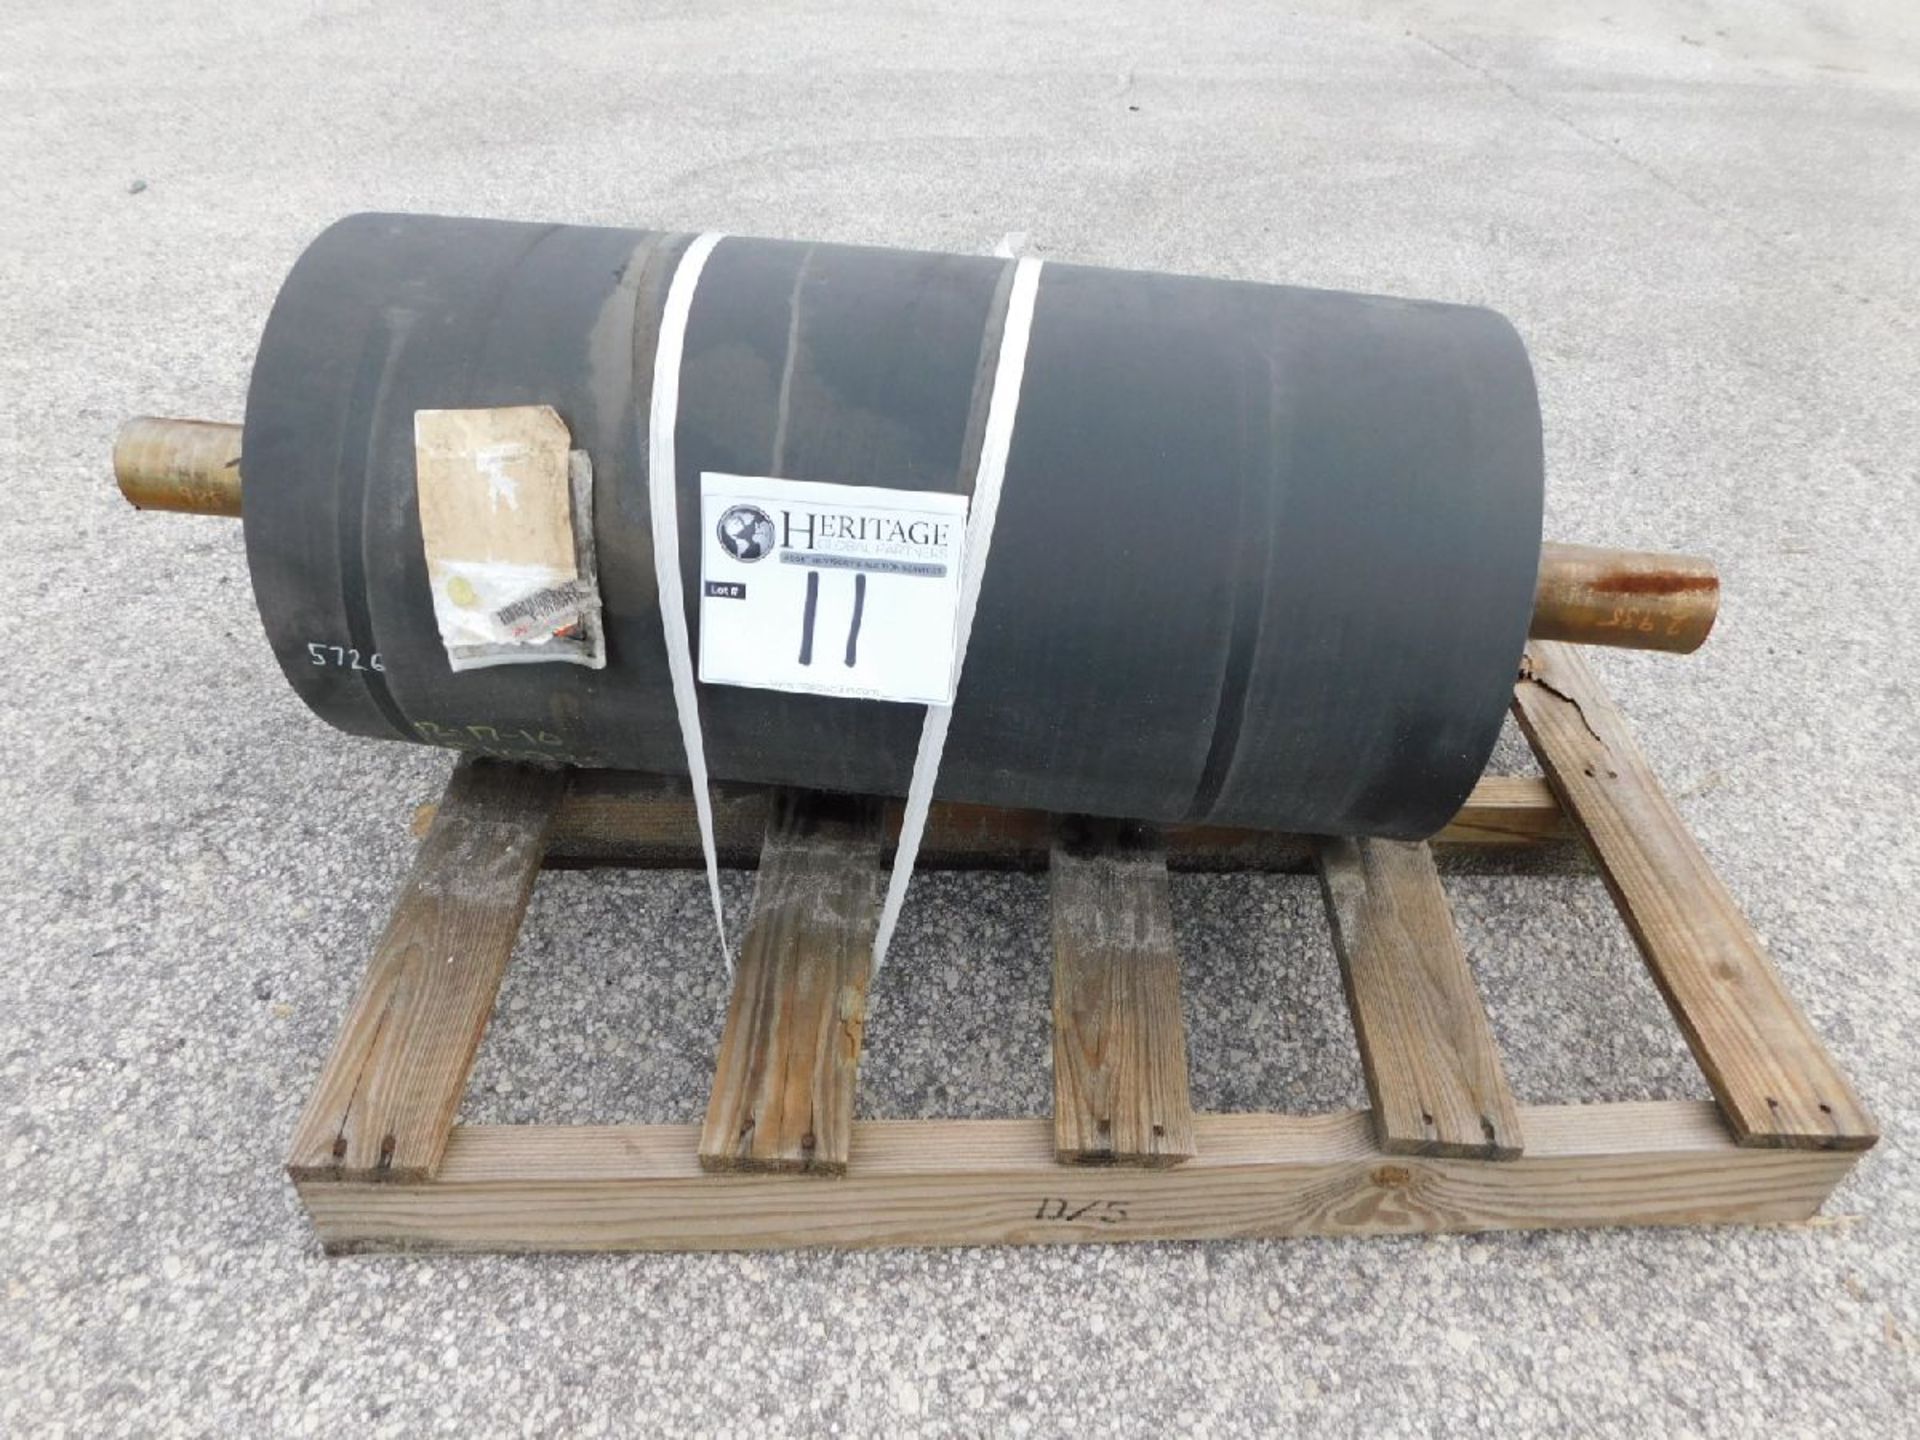 Conveyor Drum - 32"Wide x 16" Diameter, Without Lagging, CS. Asset# AAQ567L. Asset Located at 3200